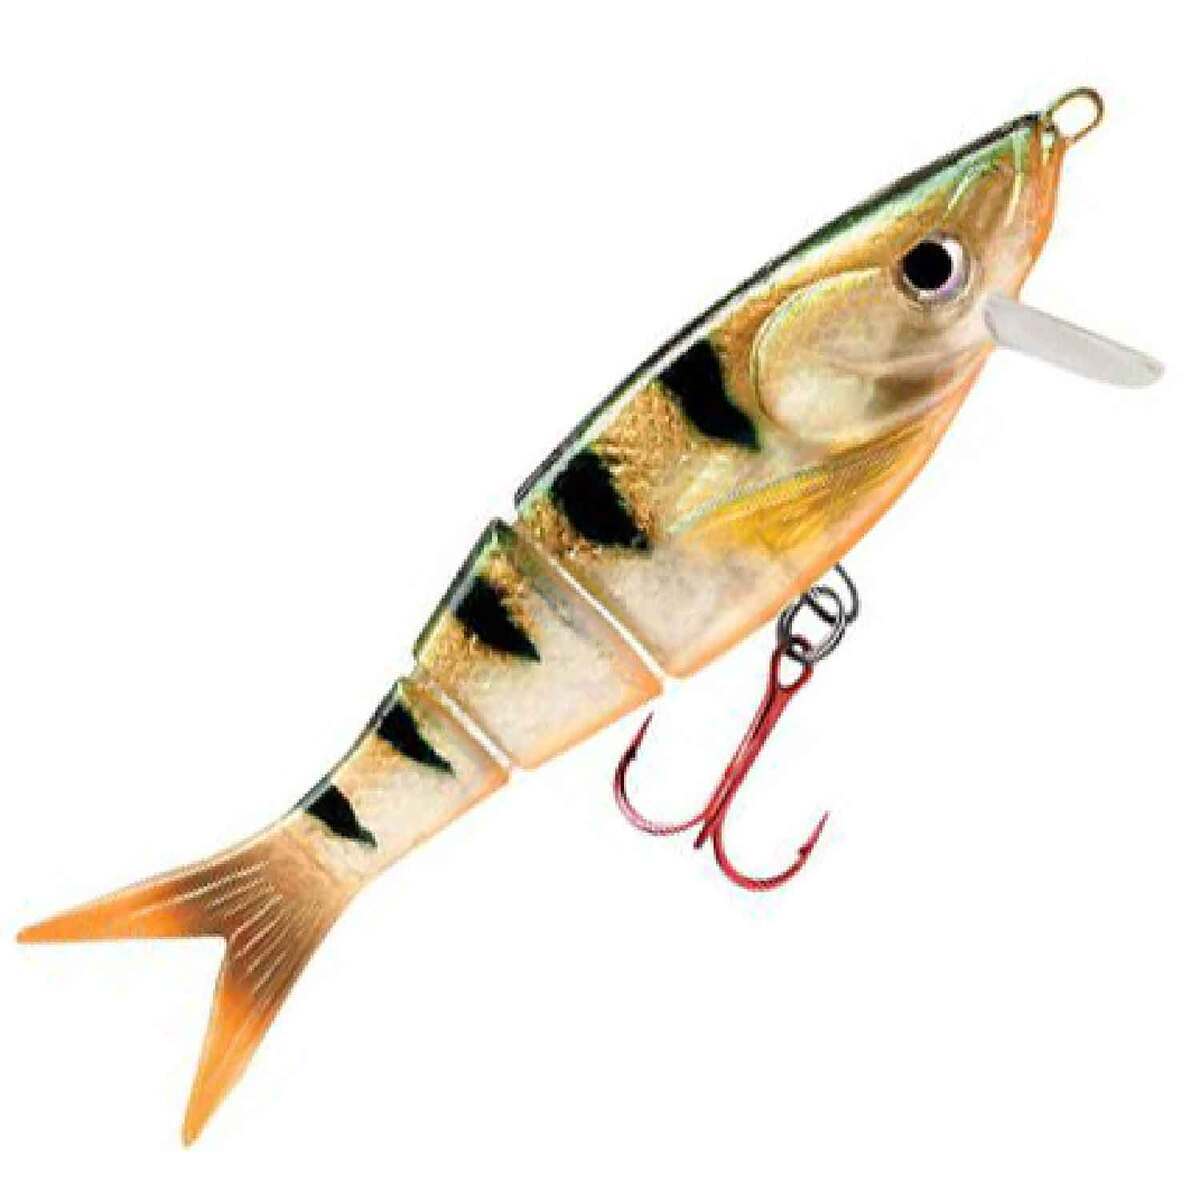 Storm Lures Kickin' Minnow All sizes/colors available